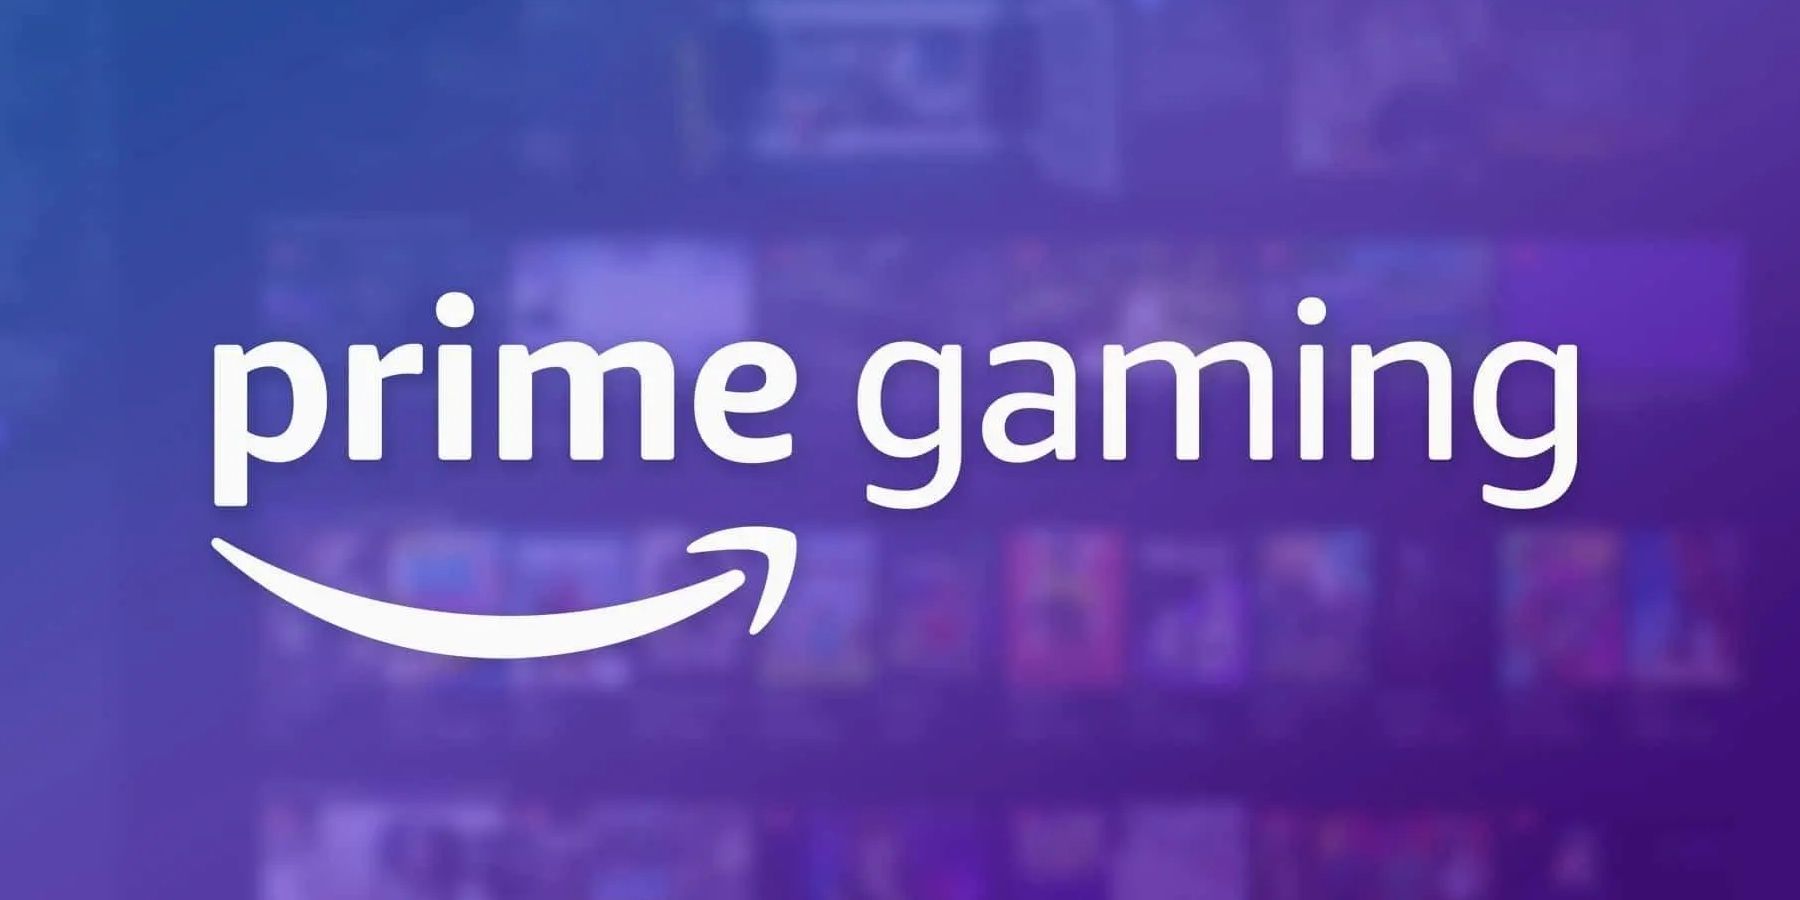 Prime members can get two classic video games for free in December, Gaming, Entertainment